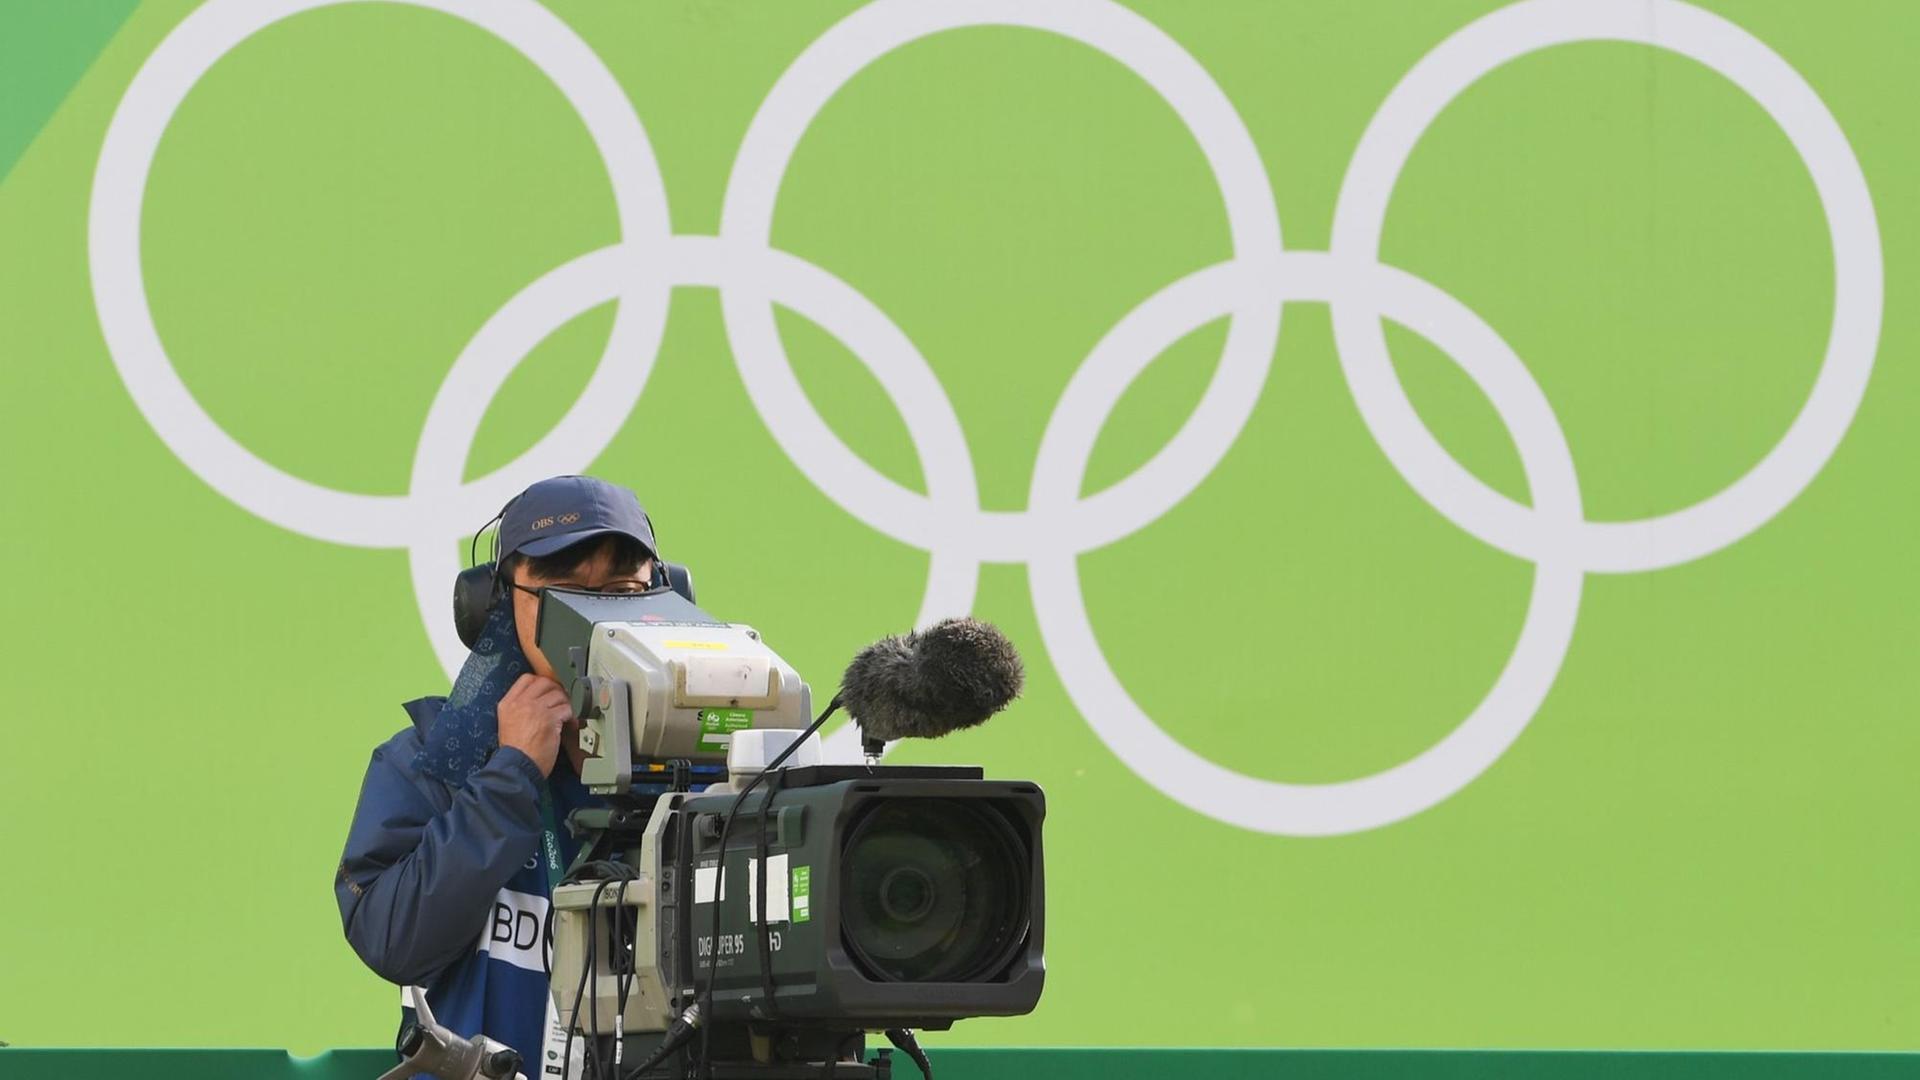 A TV cameraman shoots during the Women's Individual 1/8 Eliminations of the Archery events during the Rio 2016 Olympic Games at the Sambodromo in Rio de Janeiro, Brazil, 11 August 2016. Photo: Sebastian Kahnert/dpa | Verwendung weltweit